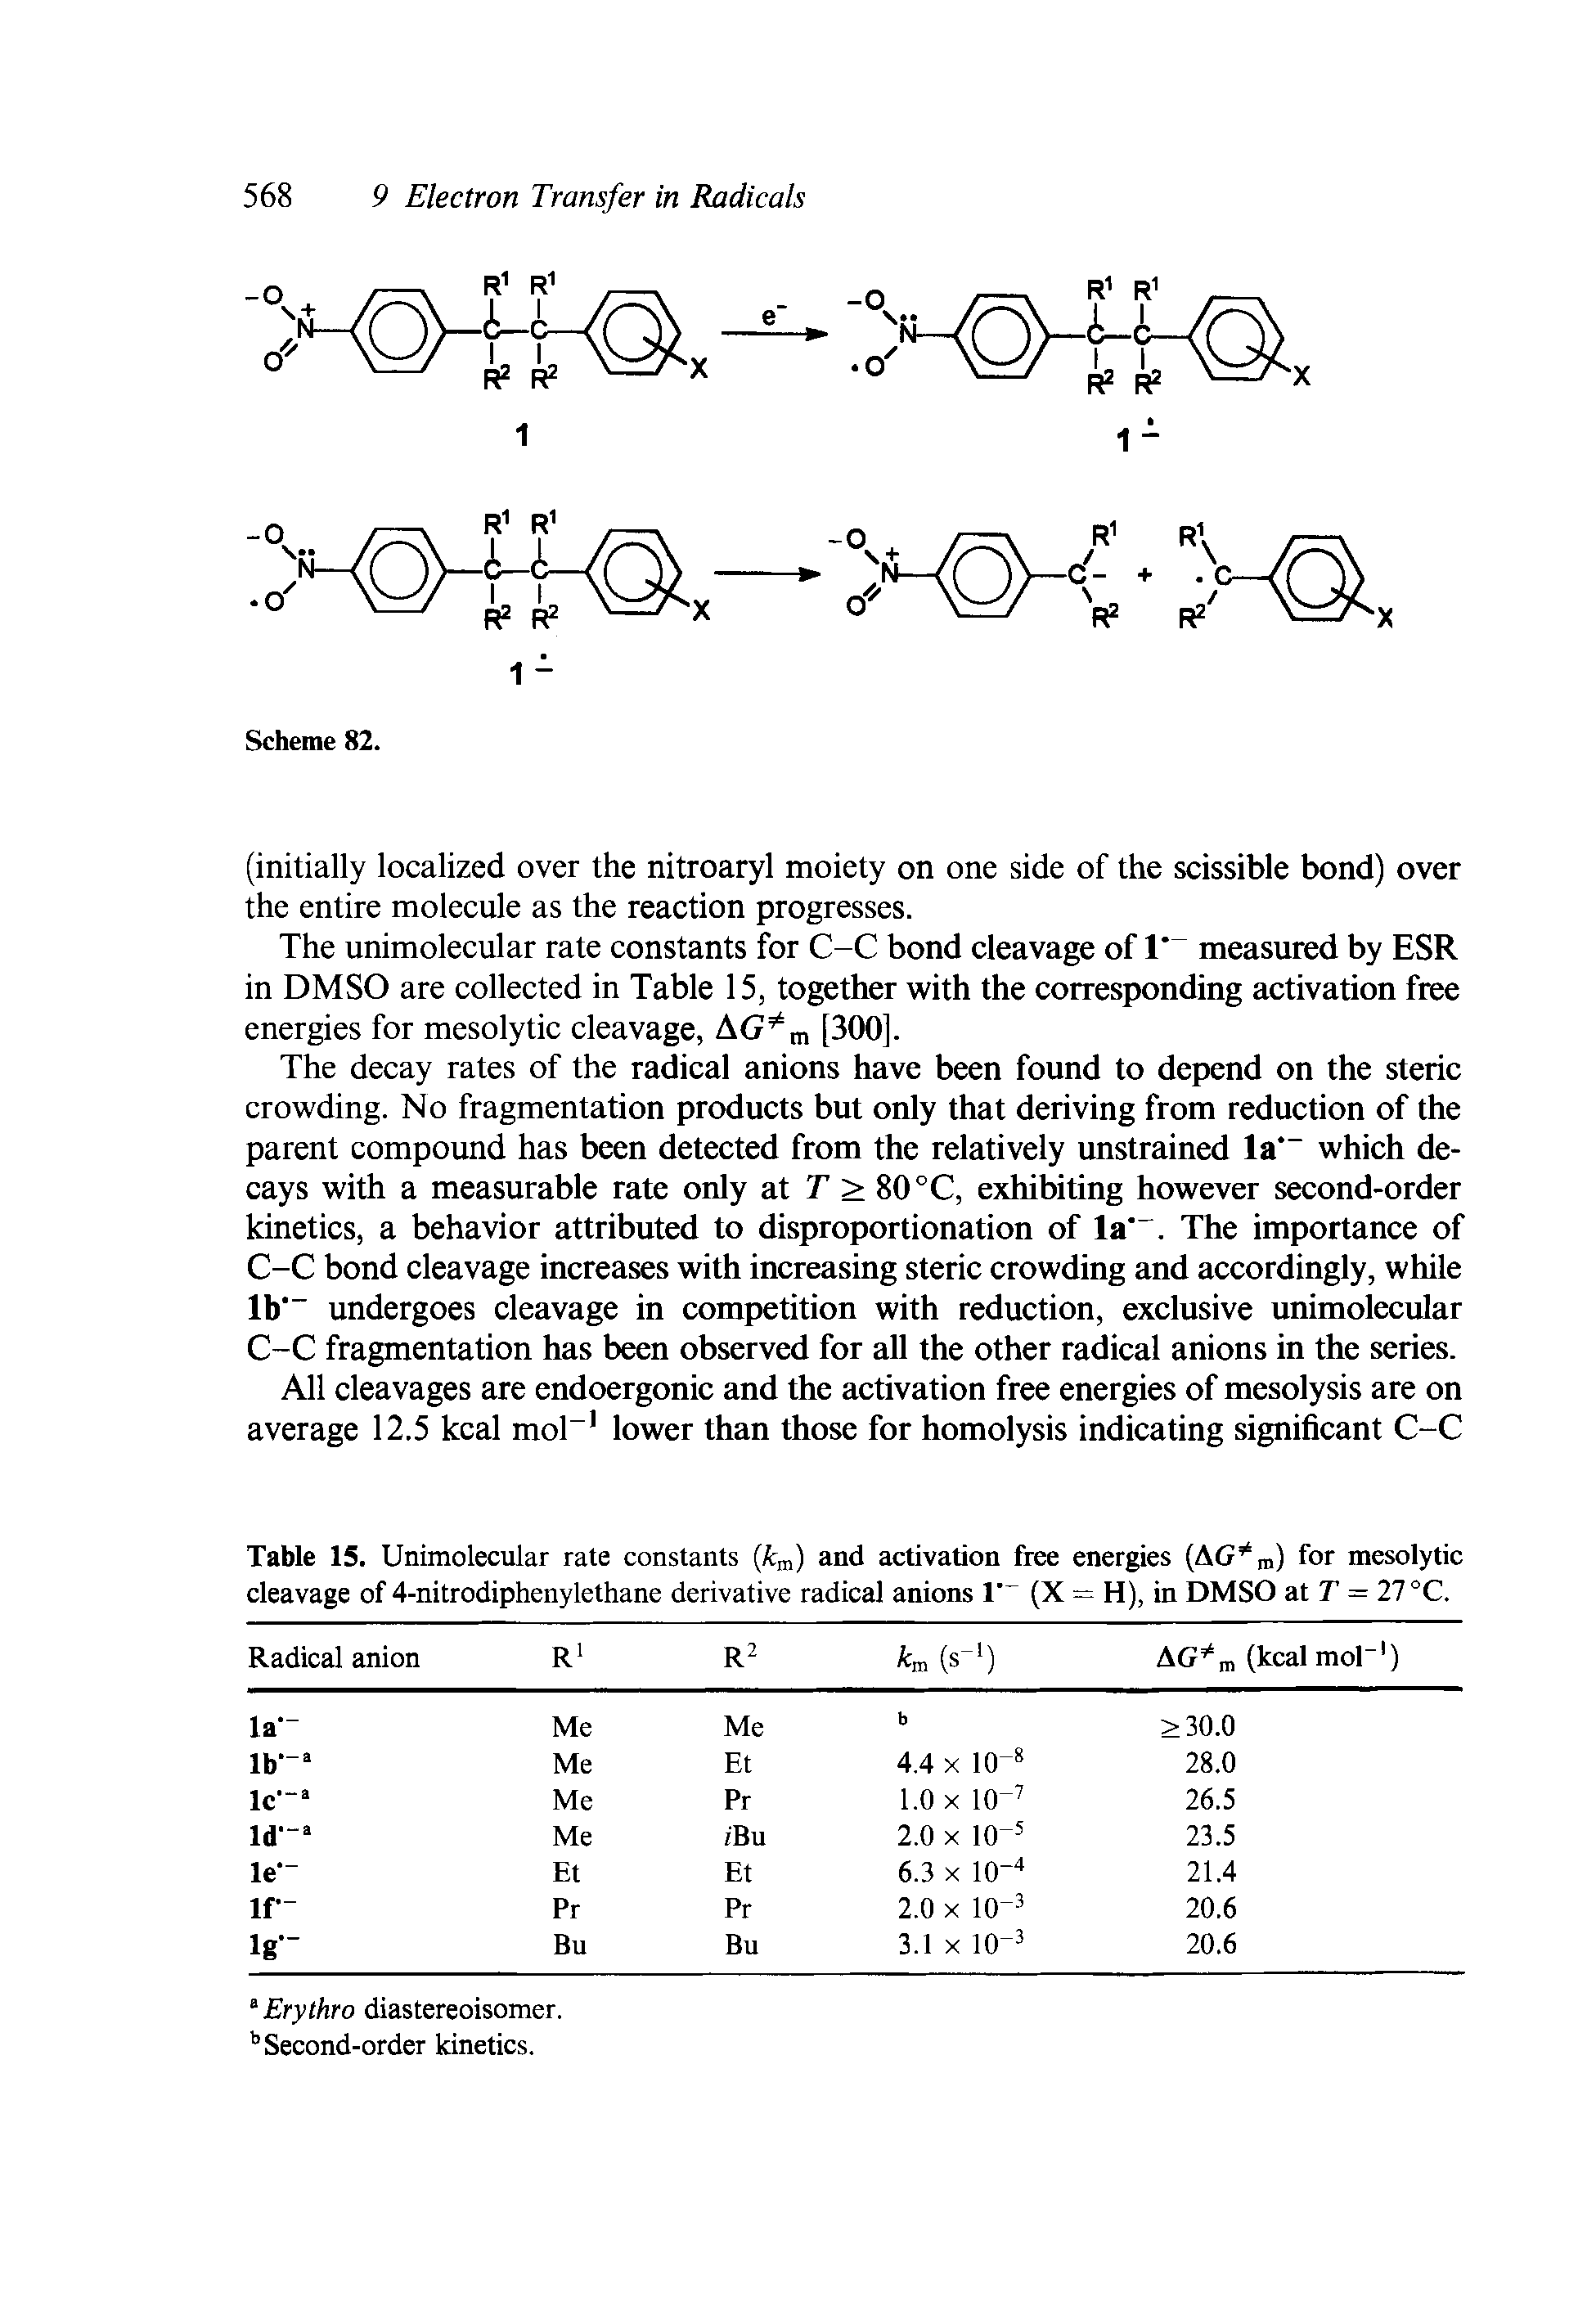 Table 15. Unimolecular rate constants [kf) and activation free energies (AG ni) for mesolytic cleavage of 4-nitrodiphenylethane derivative radical anions 1 (X = H), in DMSO at T = 27 °C.